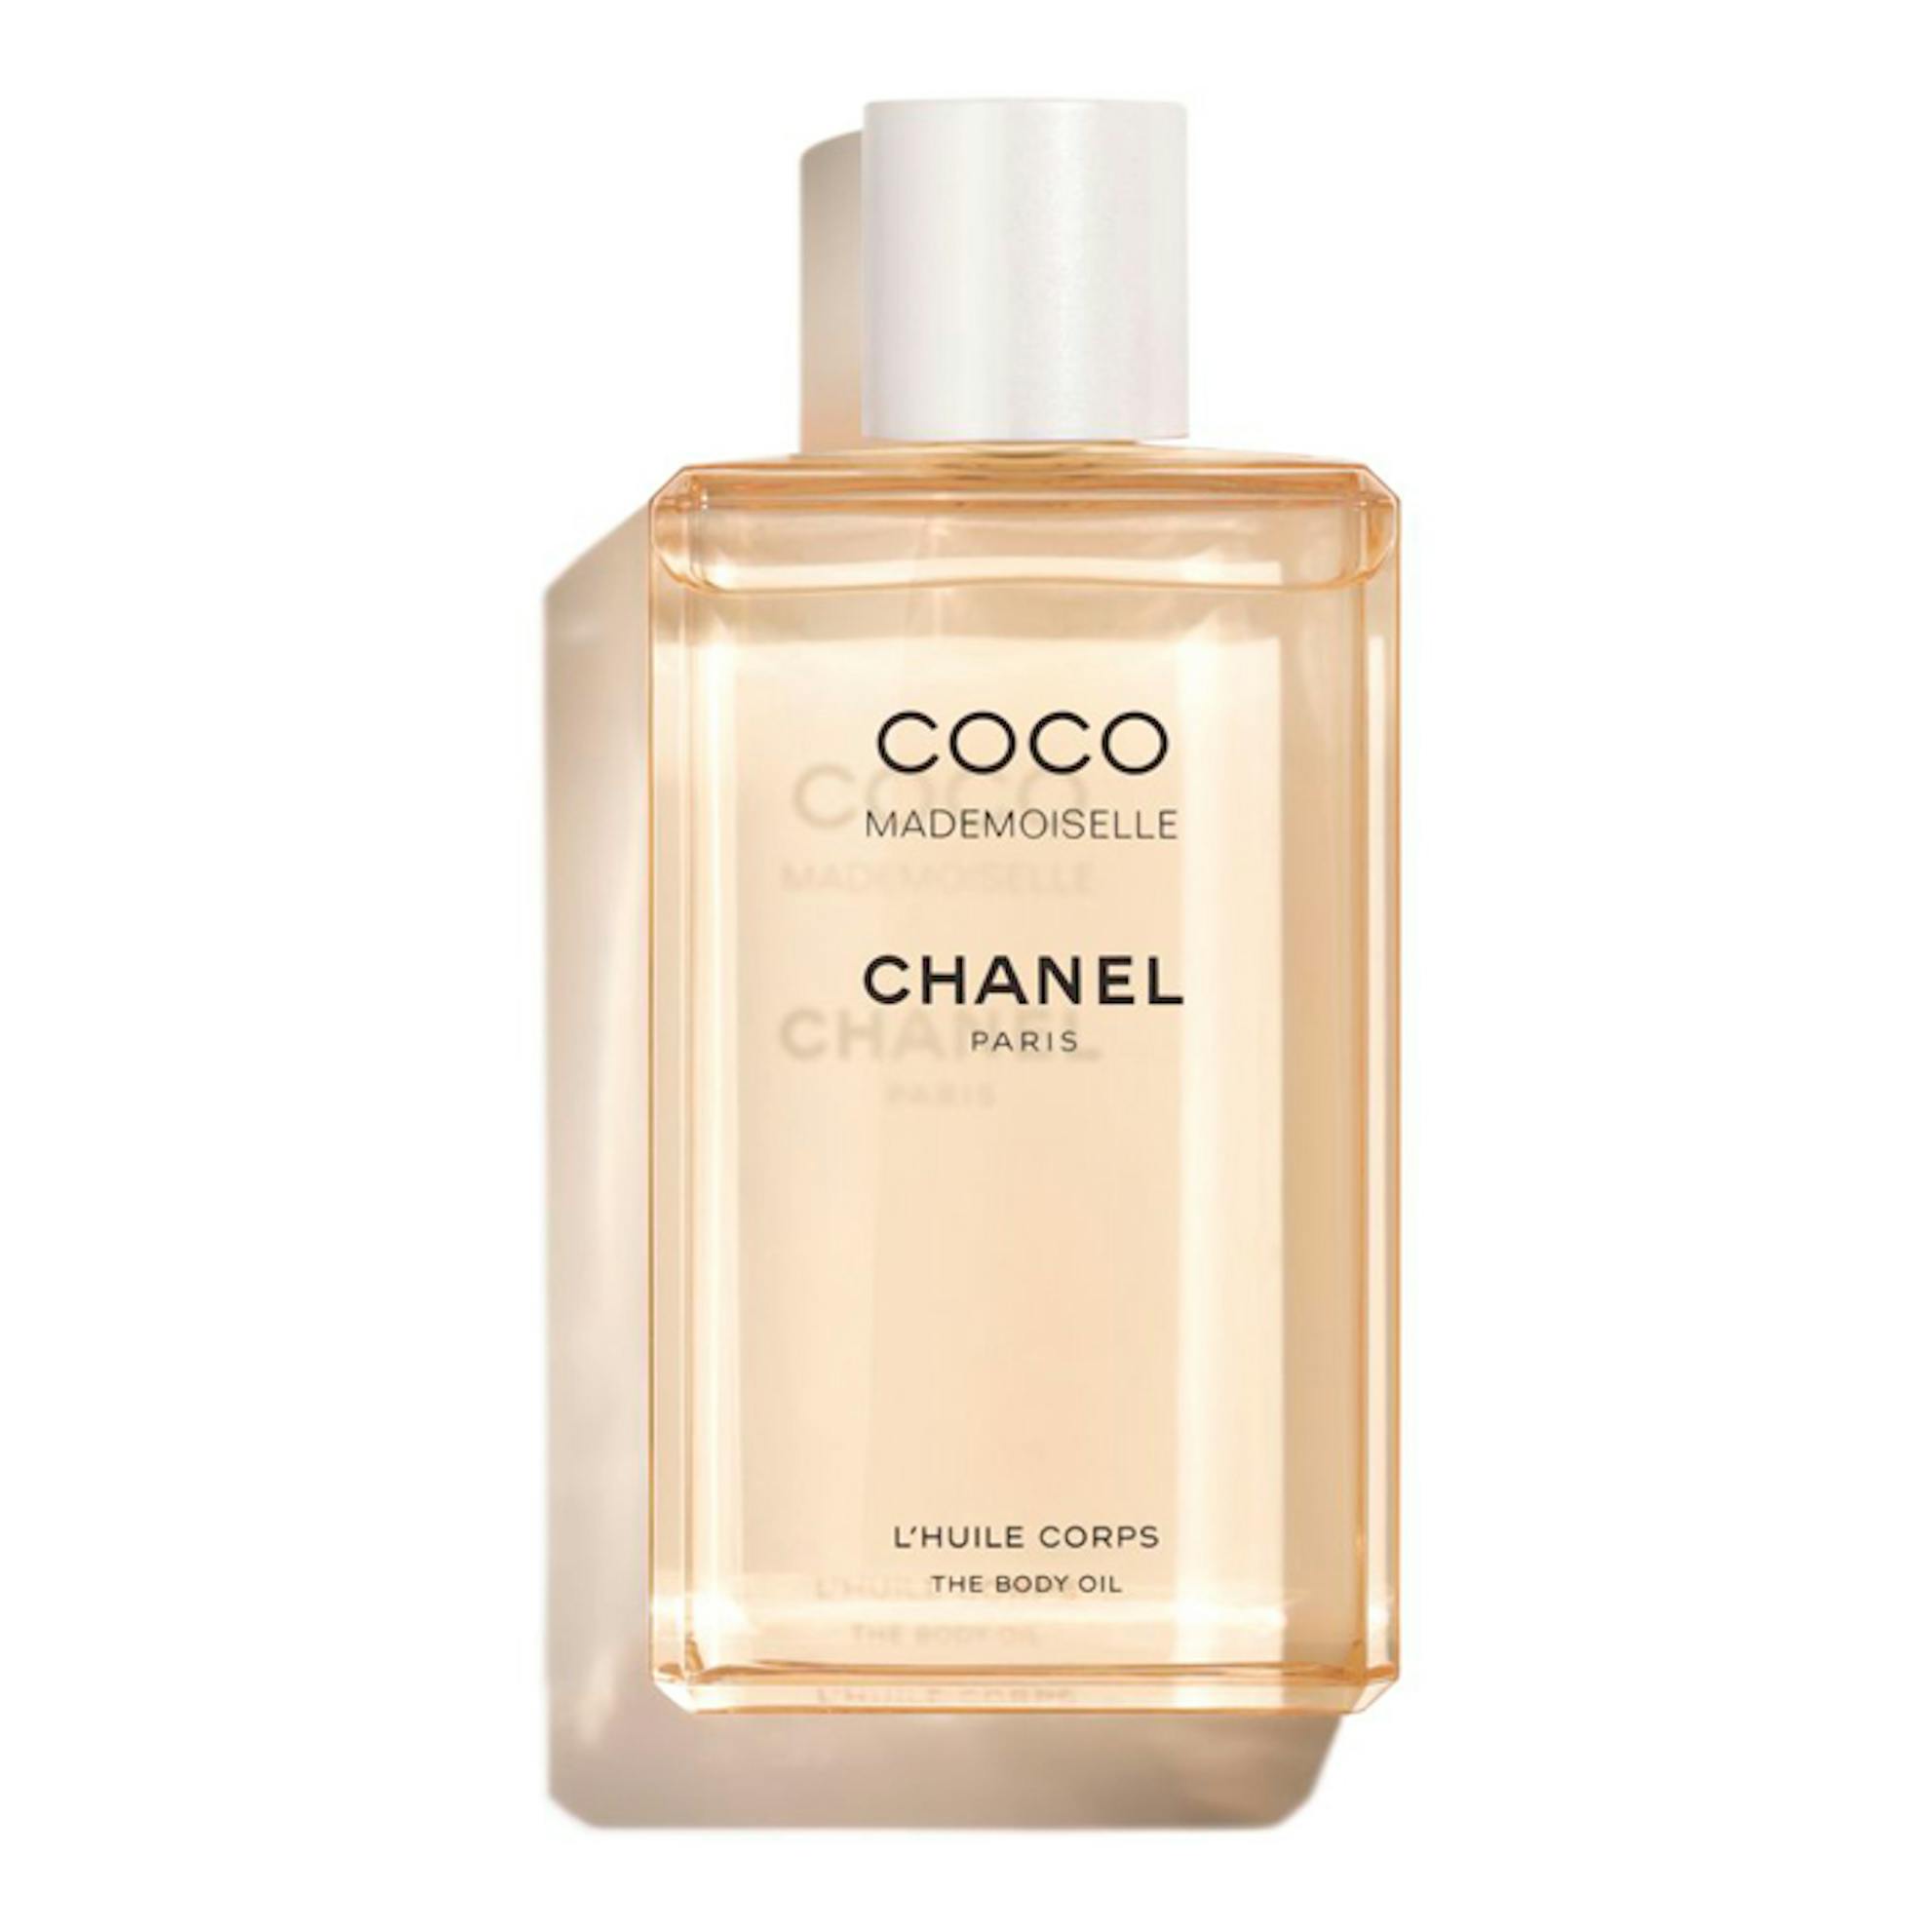 Chanel's new coco mademoiselle creation is here, and this is what we  thought of the hair perfume